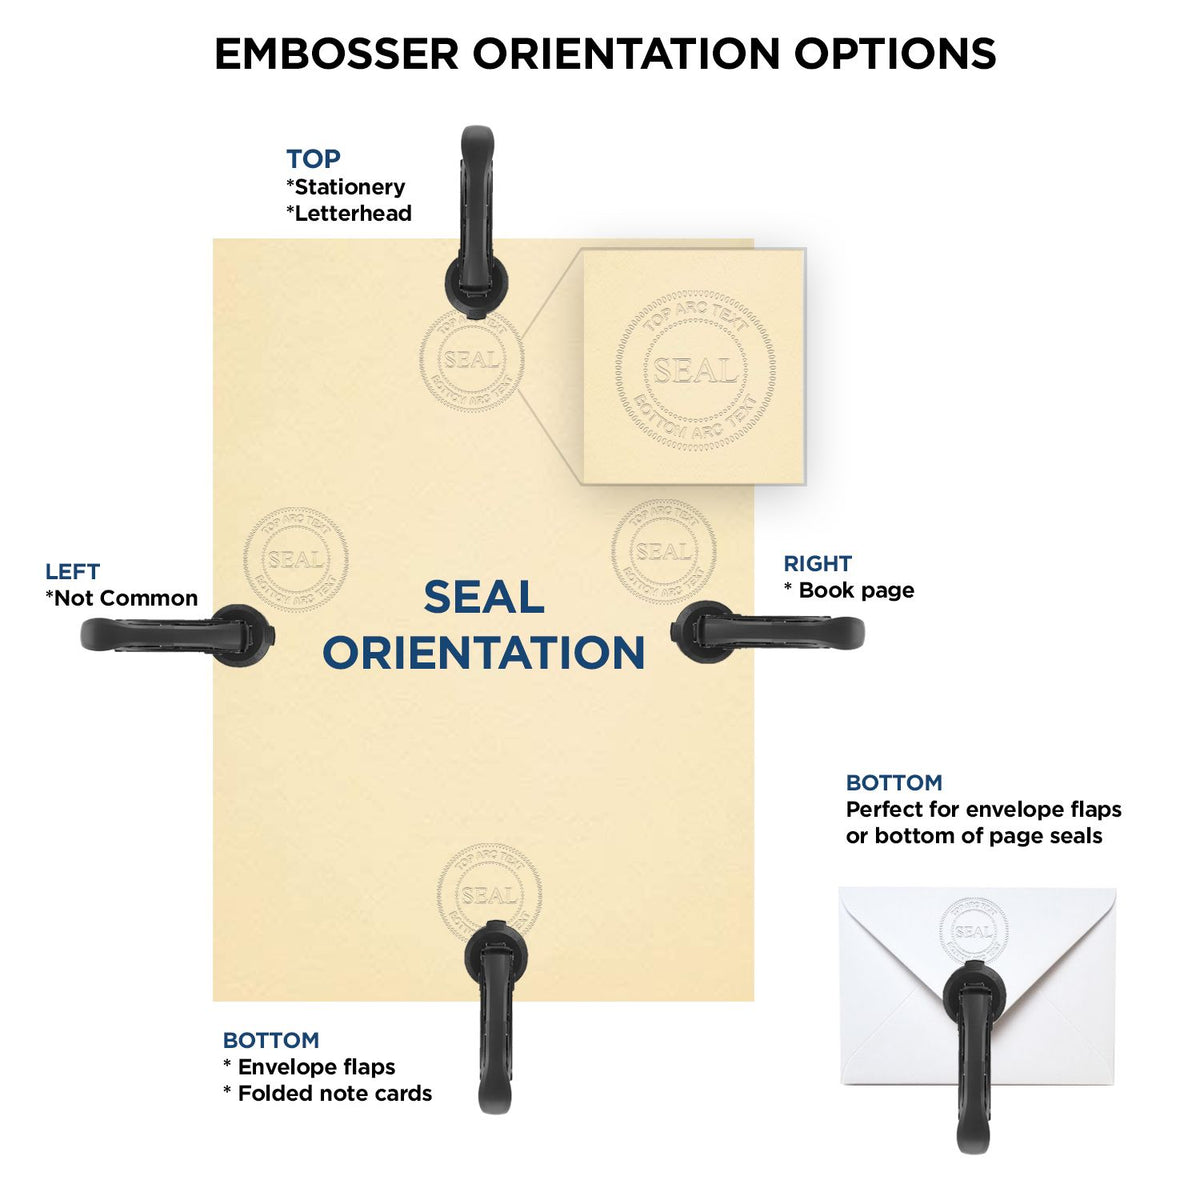 An infographic for the Maryland Engineer Desk Seal showing embosser orientation, this is showing examples of a top, bottom, right and left insert.